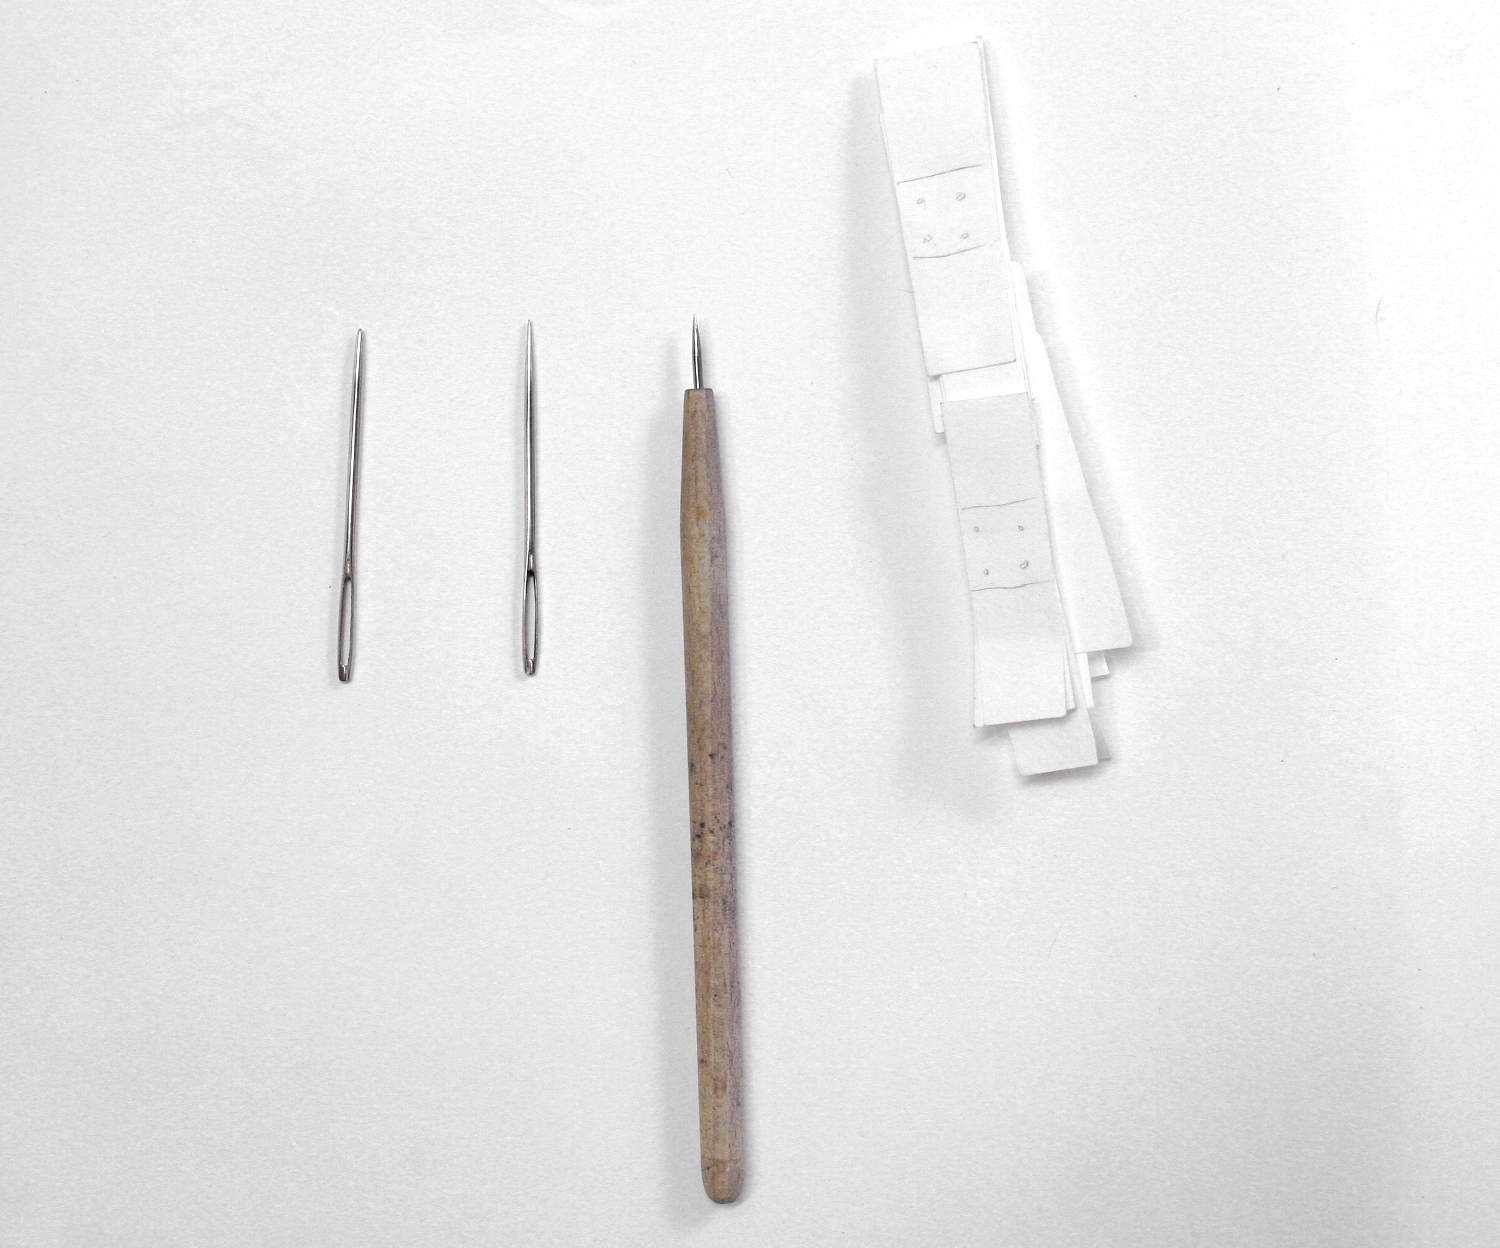 Etching needle, darning needle, paper abstractions of band-aids